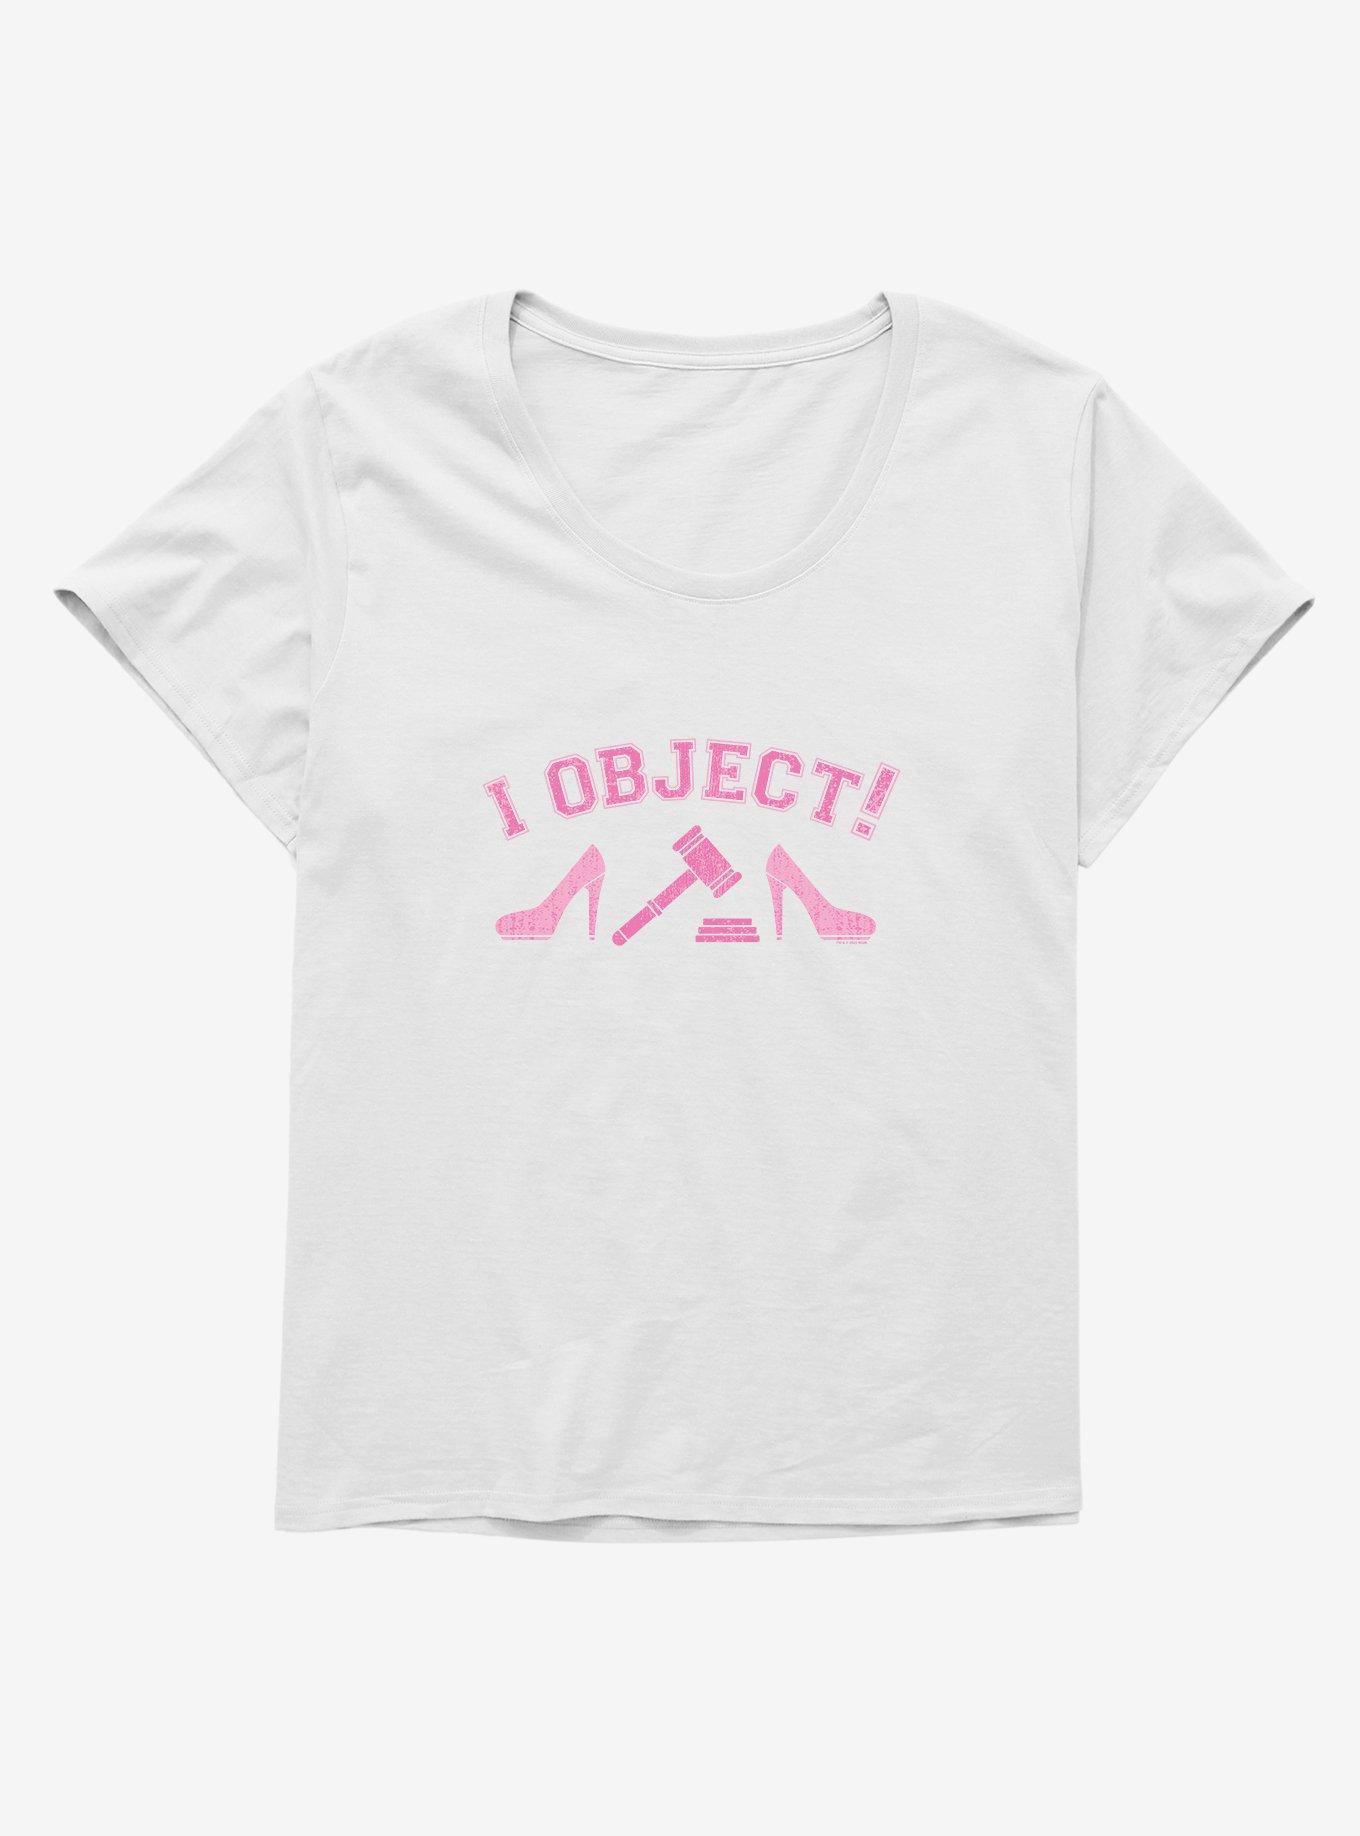 Legally Blonde I Object Girls T-Shirt Plus